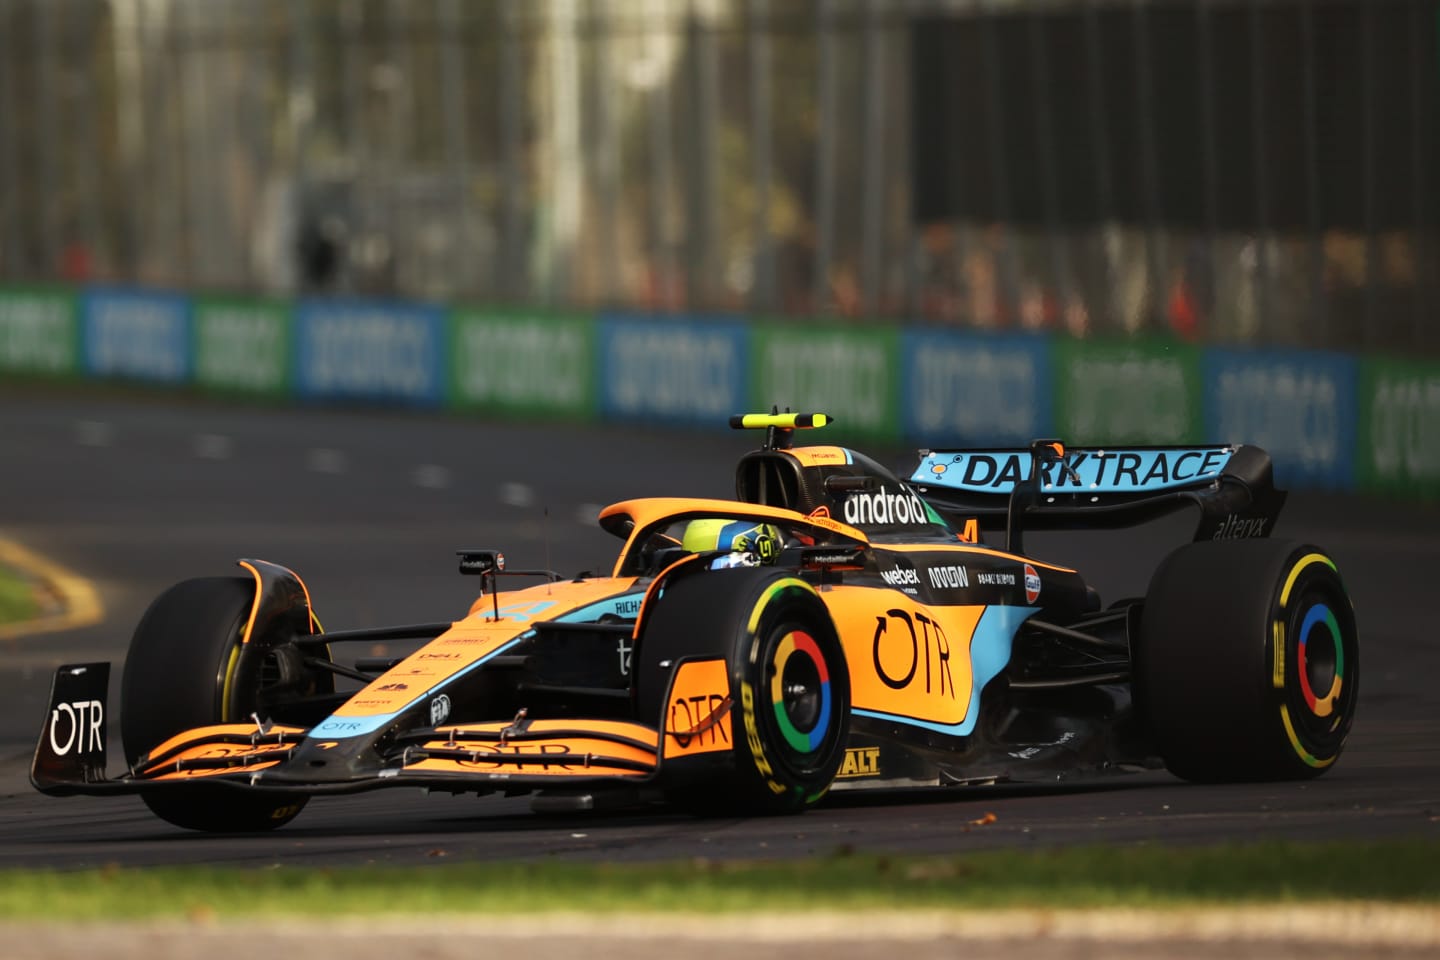 MELBOURNE, AUSTRALIA - APRIL 08: Lando Norris of Great Britain driving the (4) McLaren MCL36 Mercedes on track during practice ahead of the F1 Grand Prix of Australia at Melbourne Grand Prix Circuit on April 08, 2022 in Melbourne, Australia. (Photo by Robert Cianflone/Getty Images)